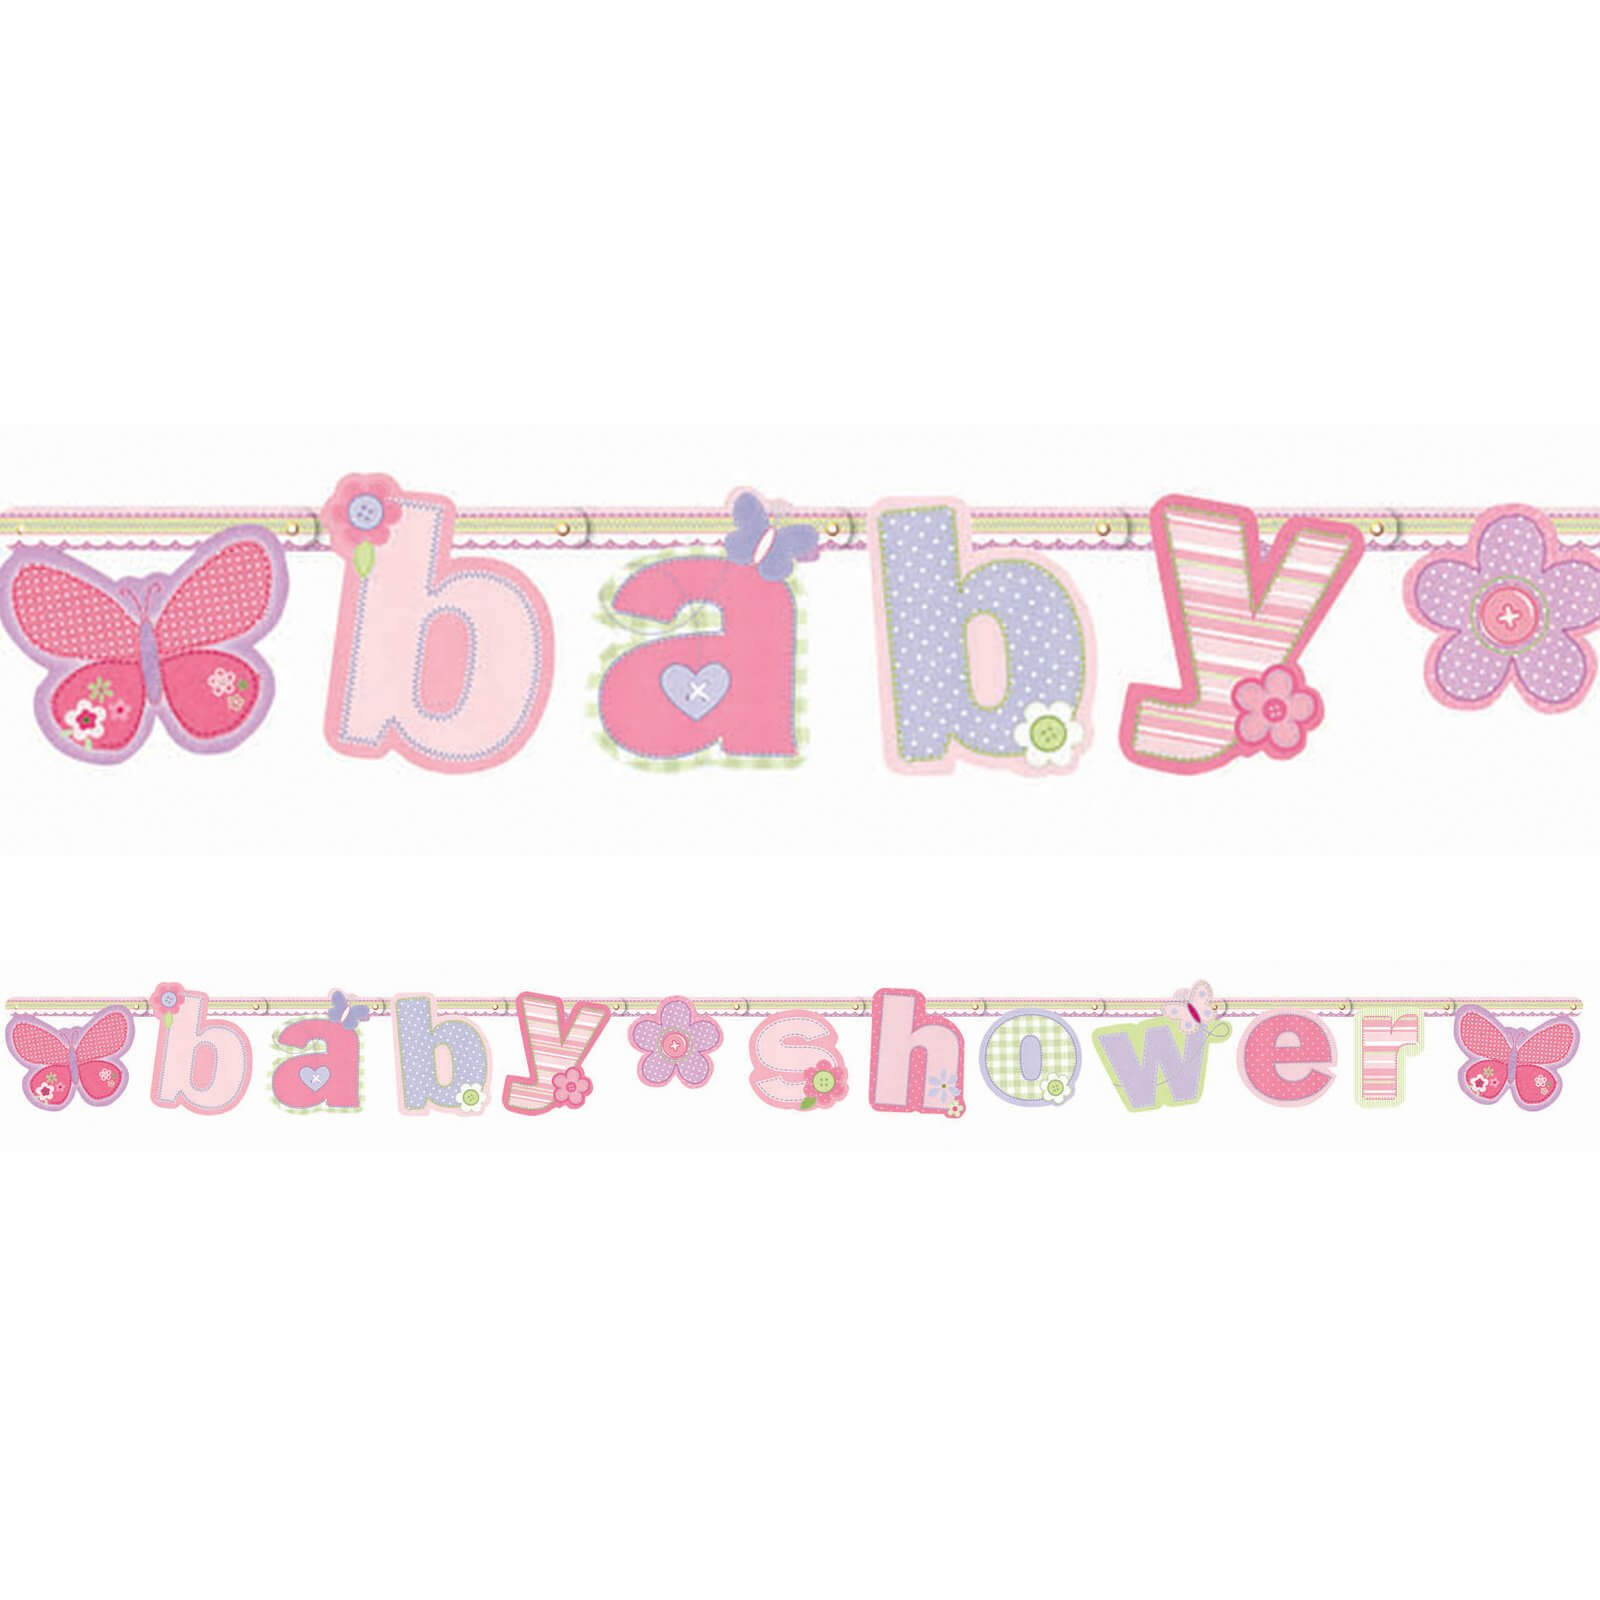 034 Bannercolab Template Ideas Baby Shower Banner Fearsome Regarding Bridal Shower Banner Template